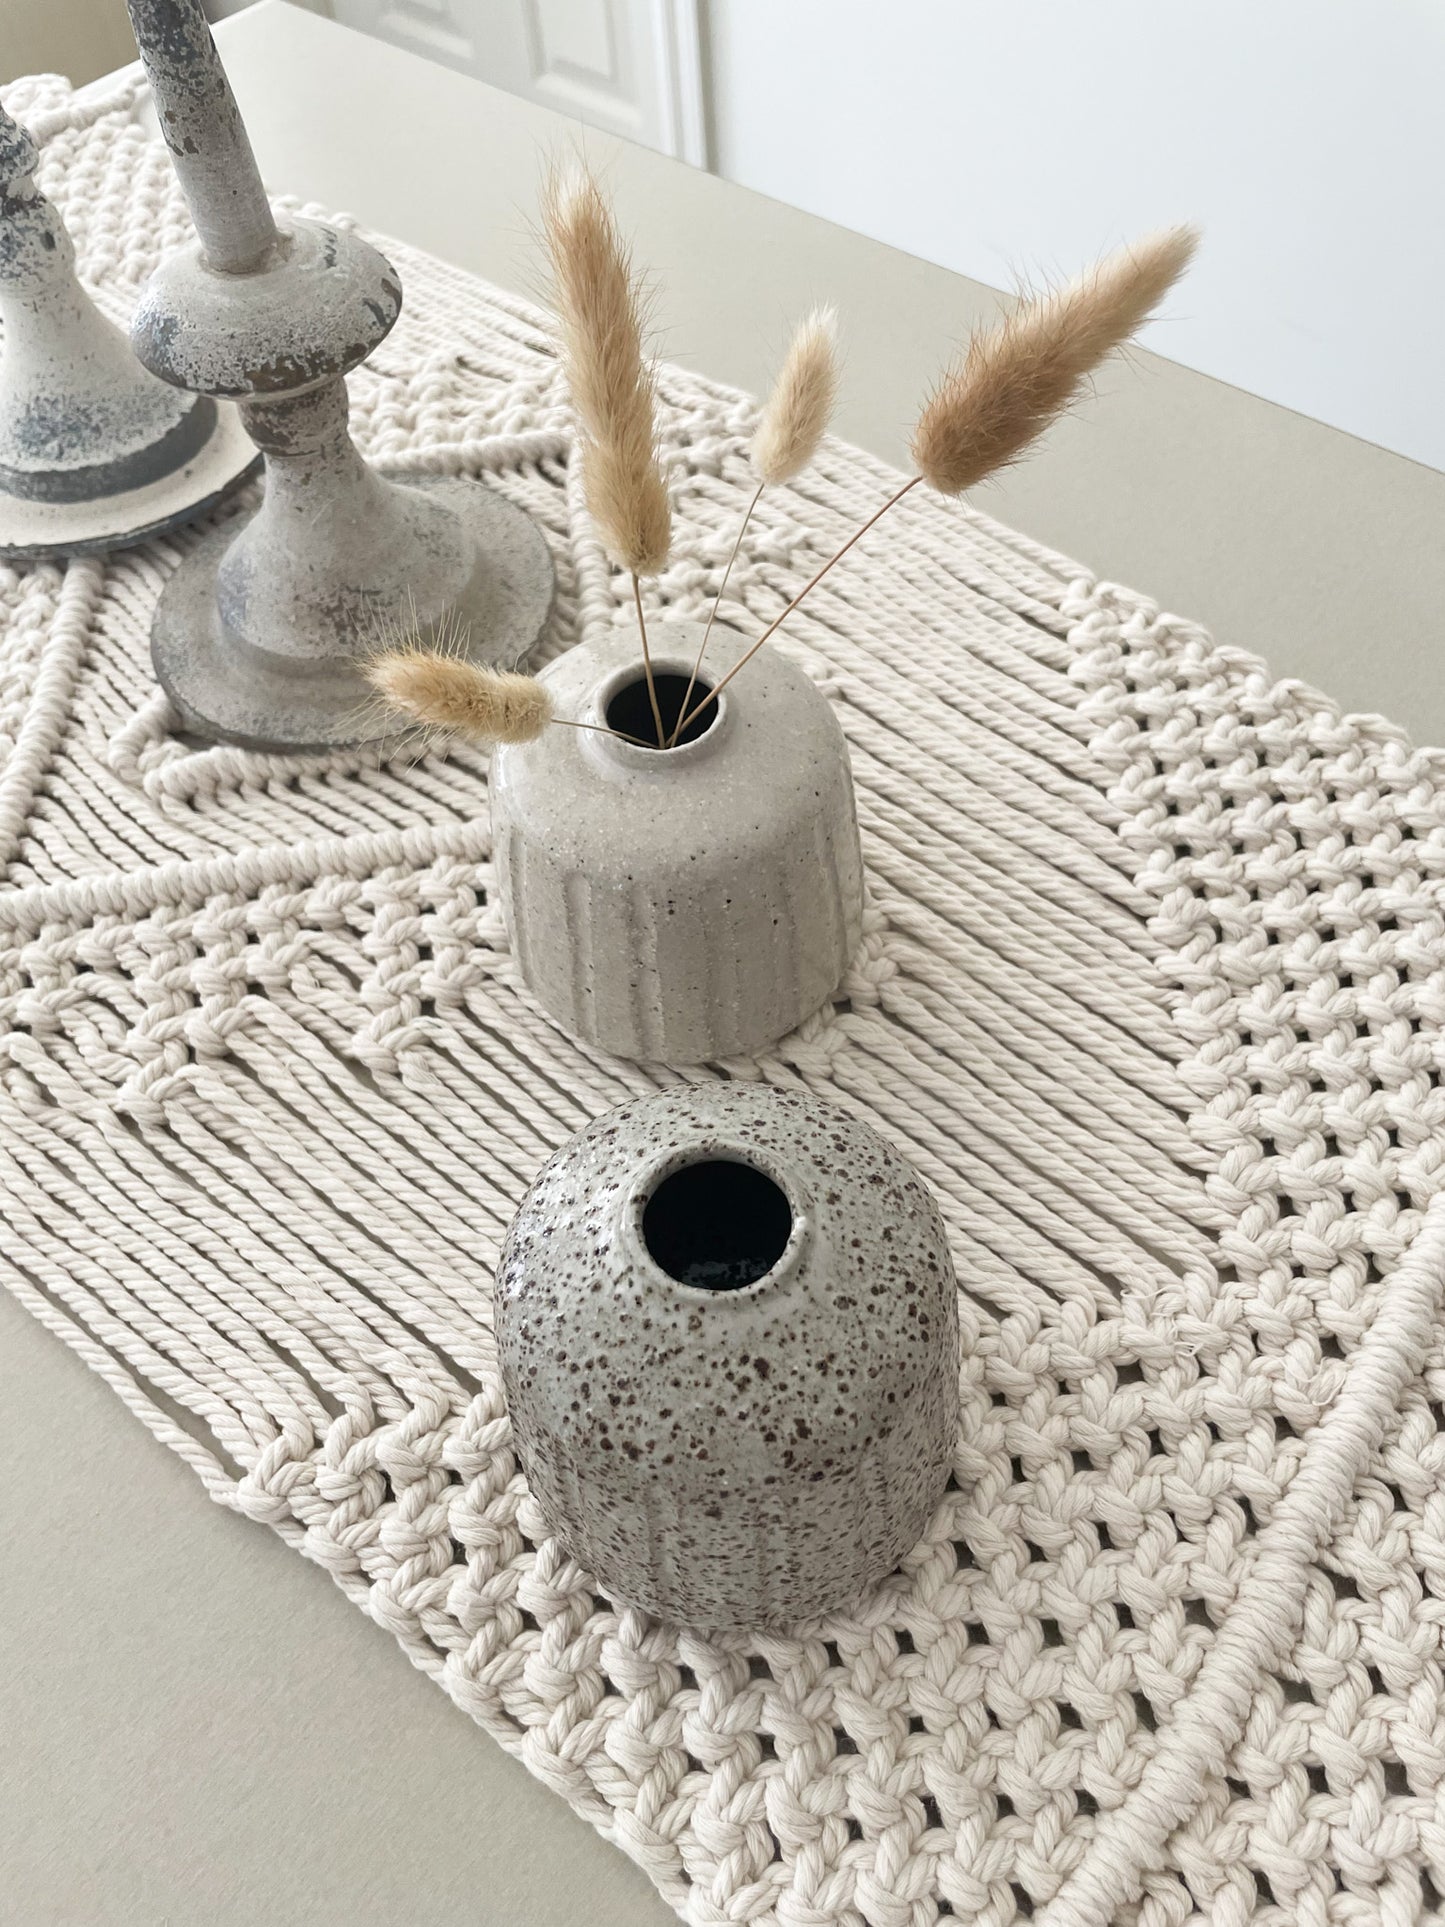 Two small ceramic vases displayed on a table runner and styled with dried flowers